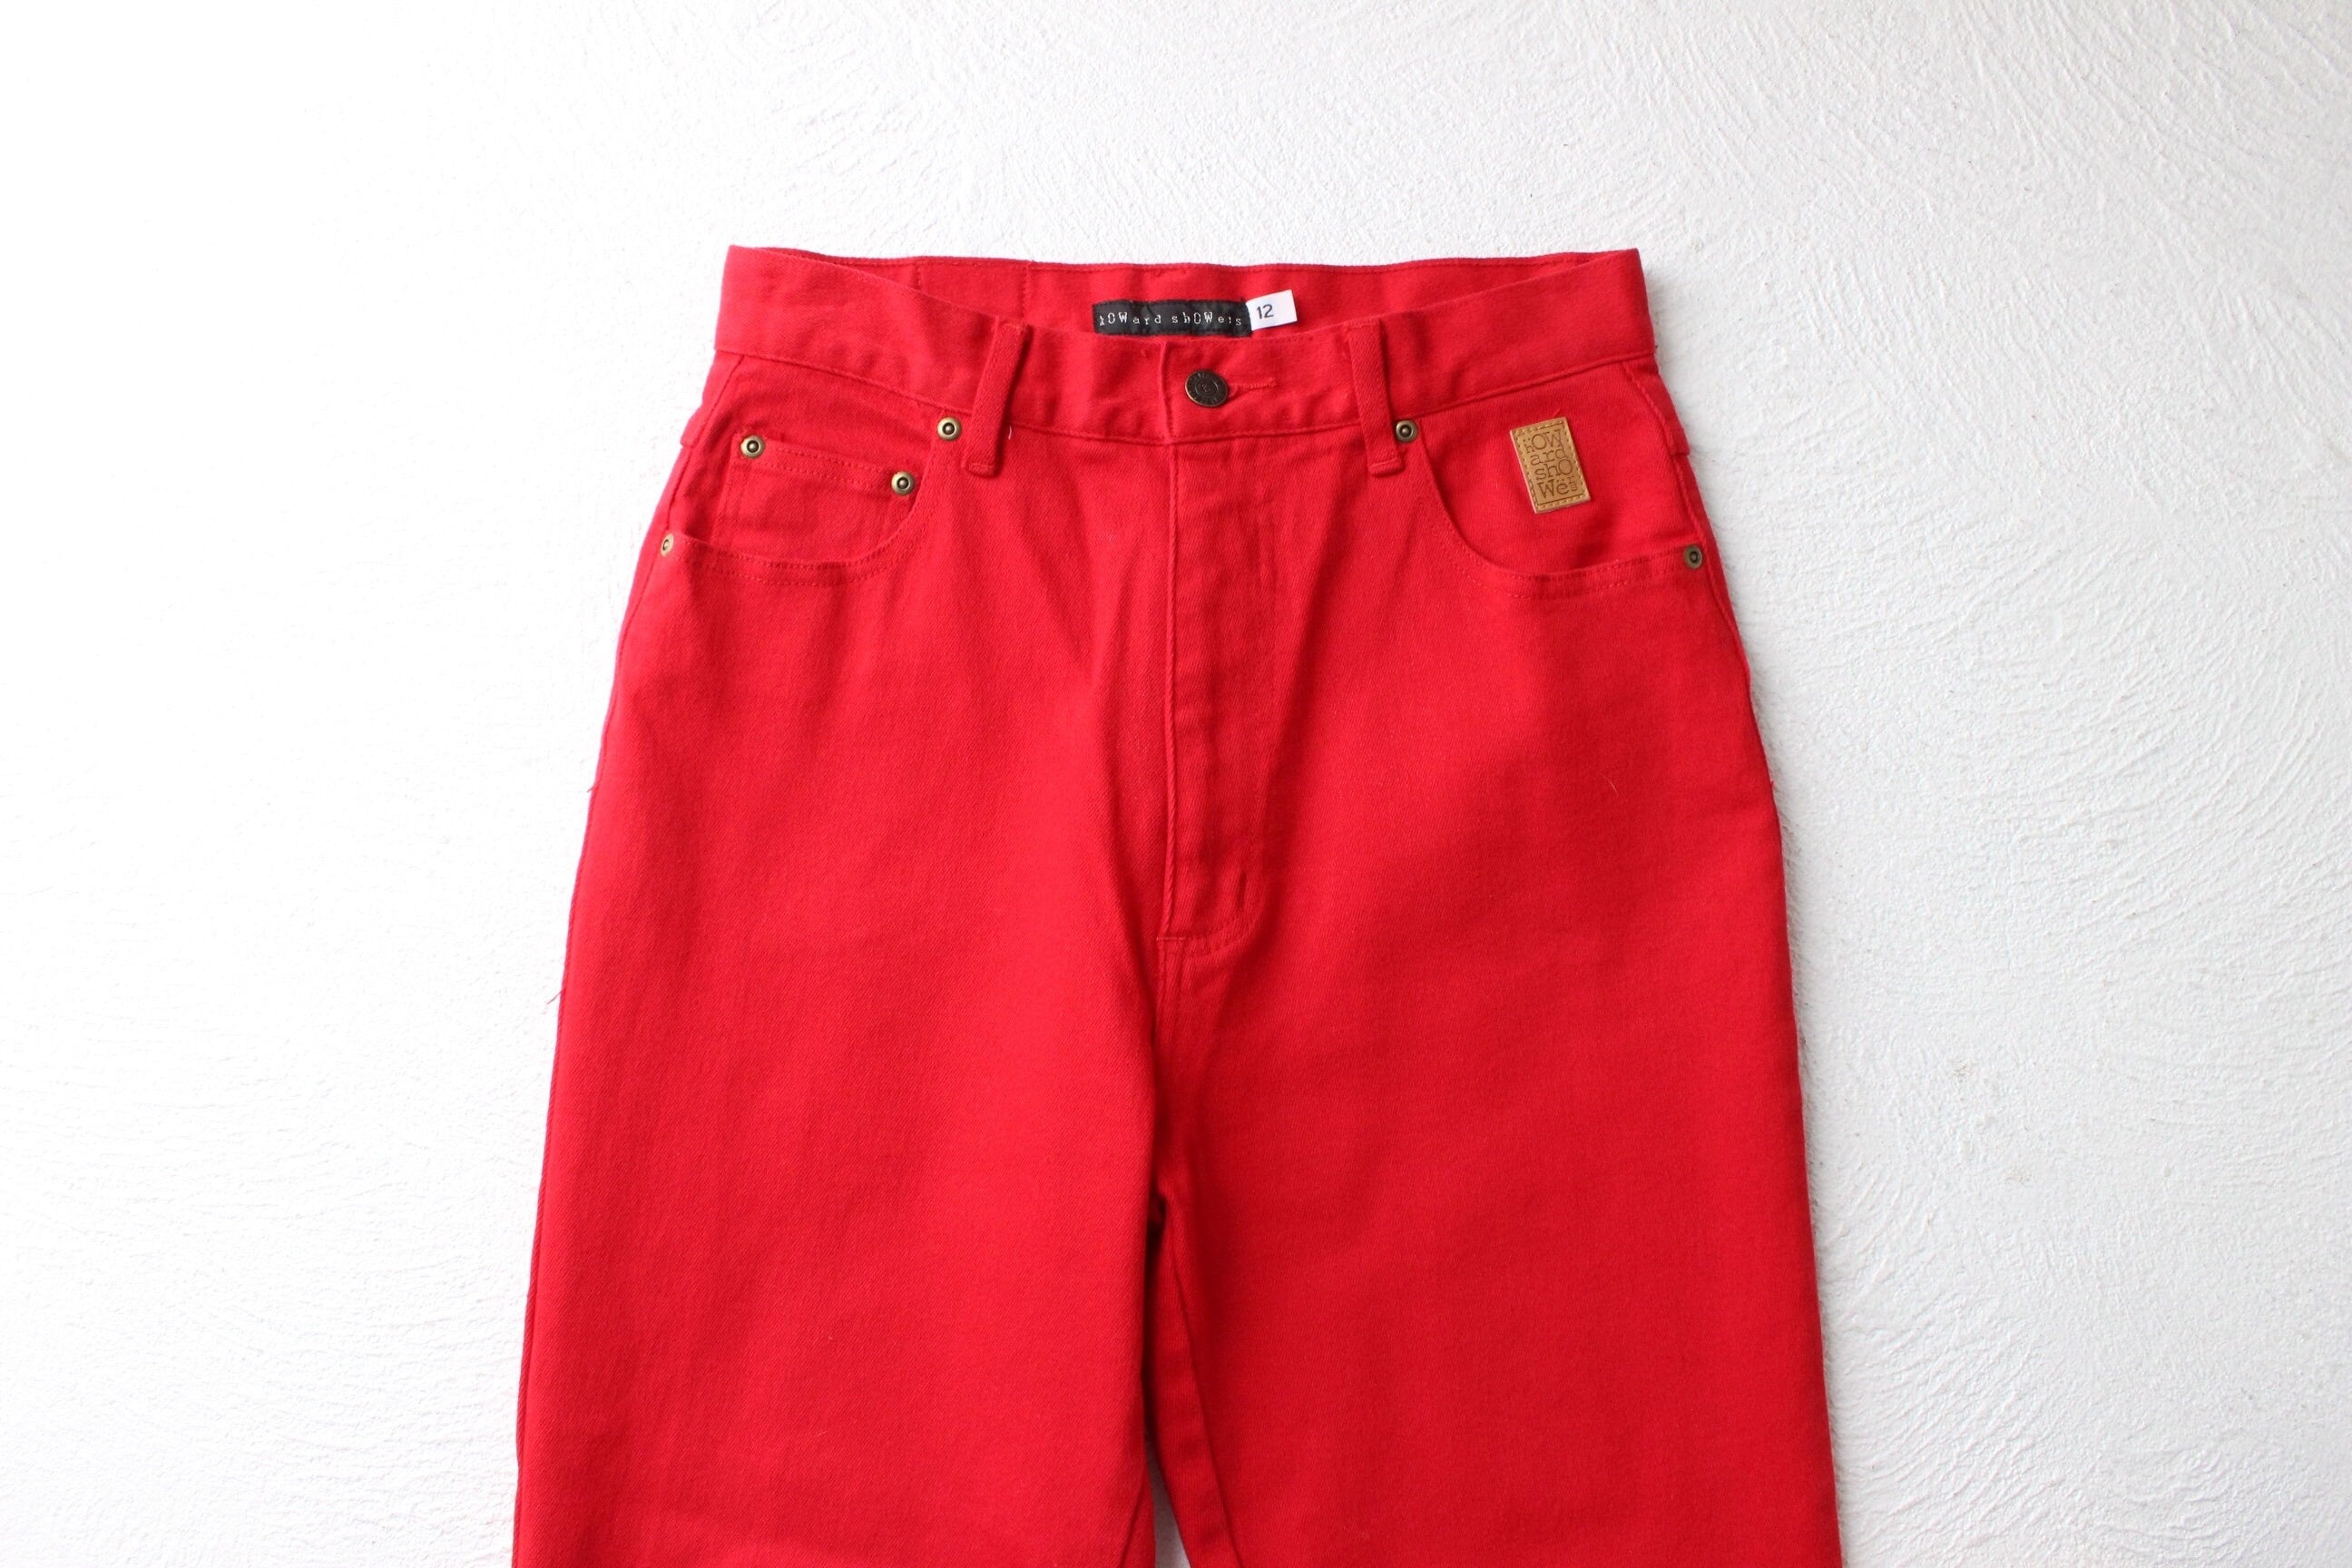 90s Quality Red Denim Jeans by Howard Showers